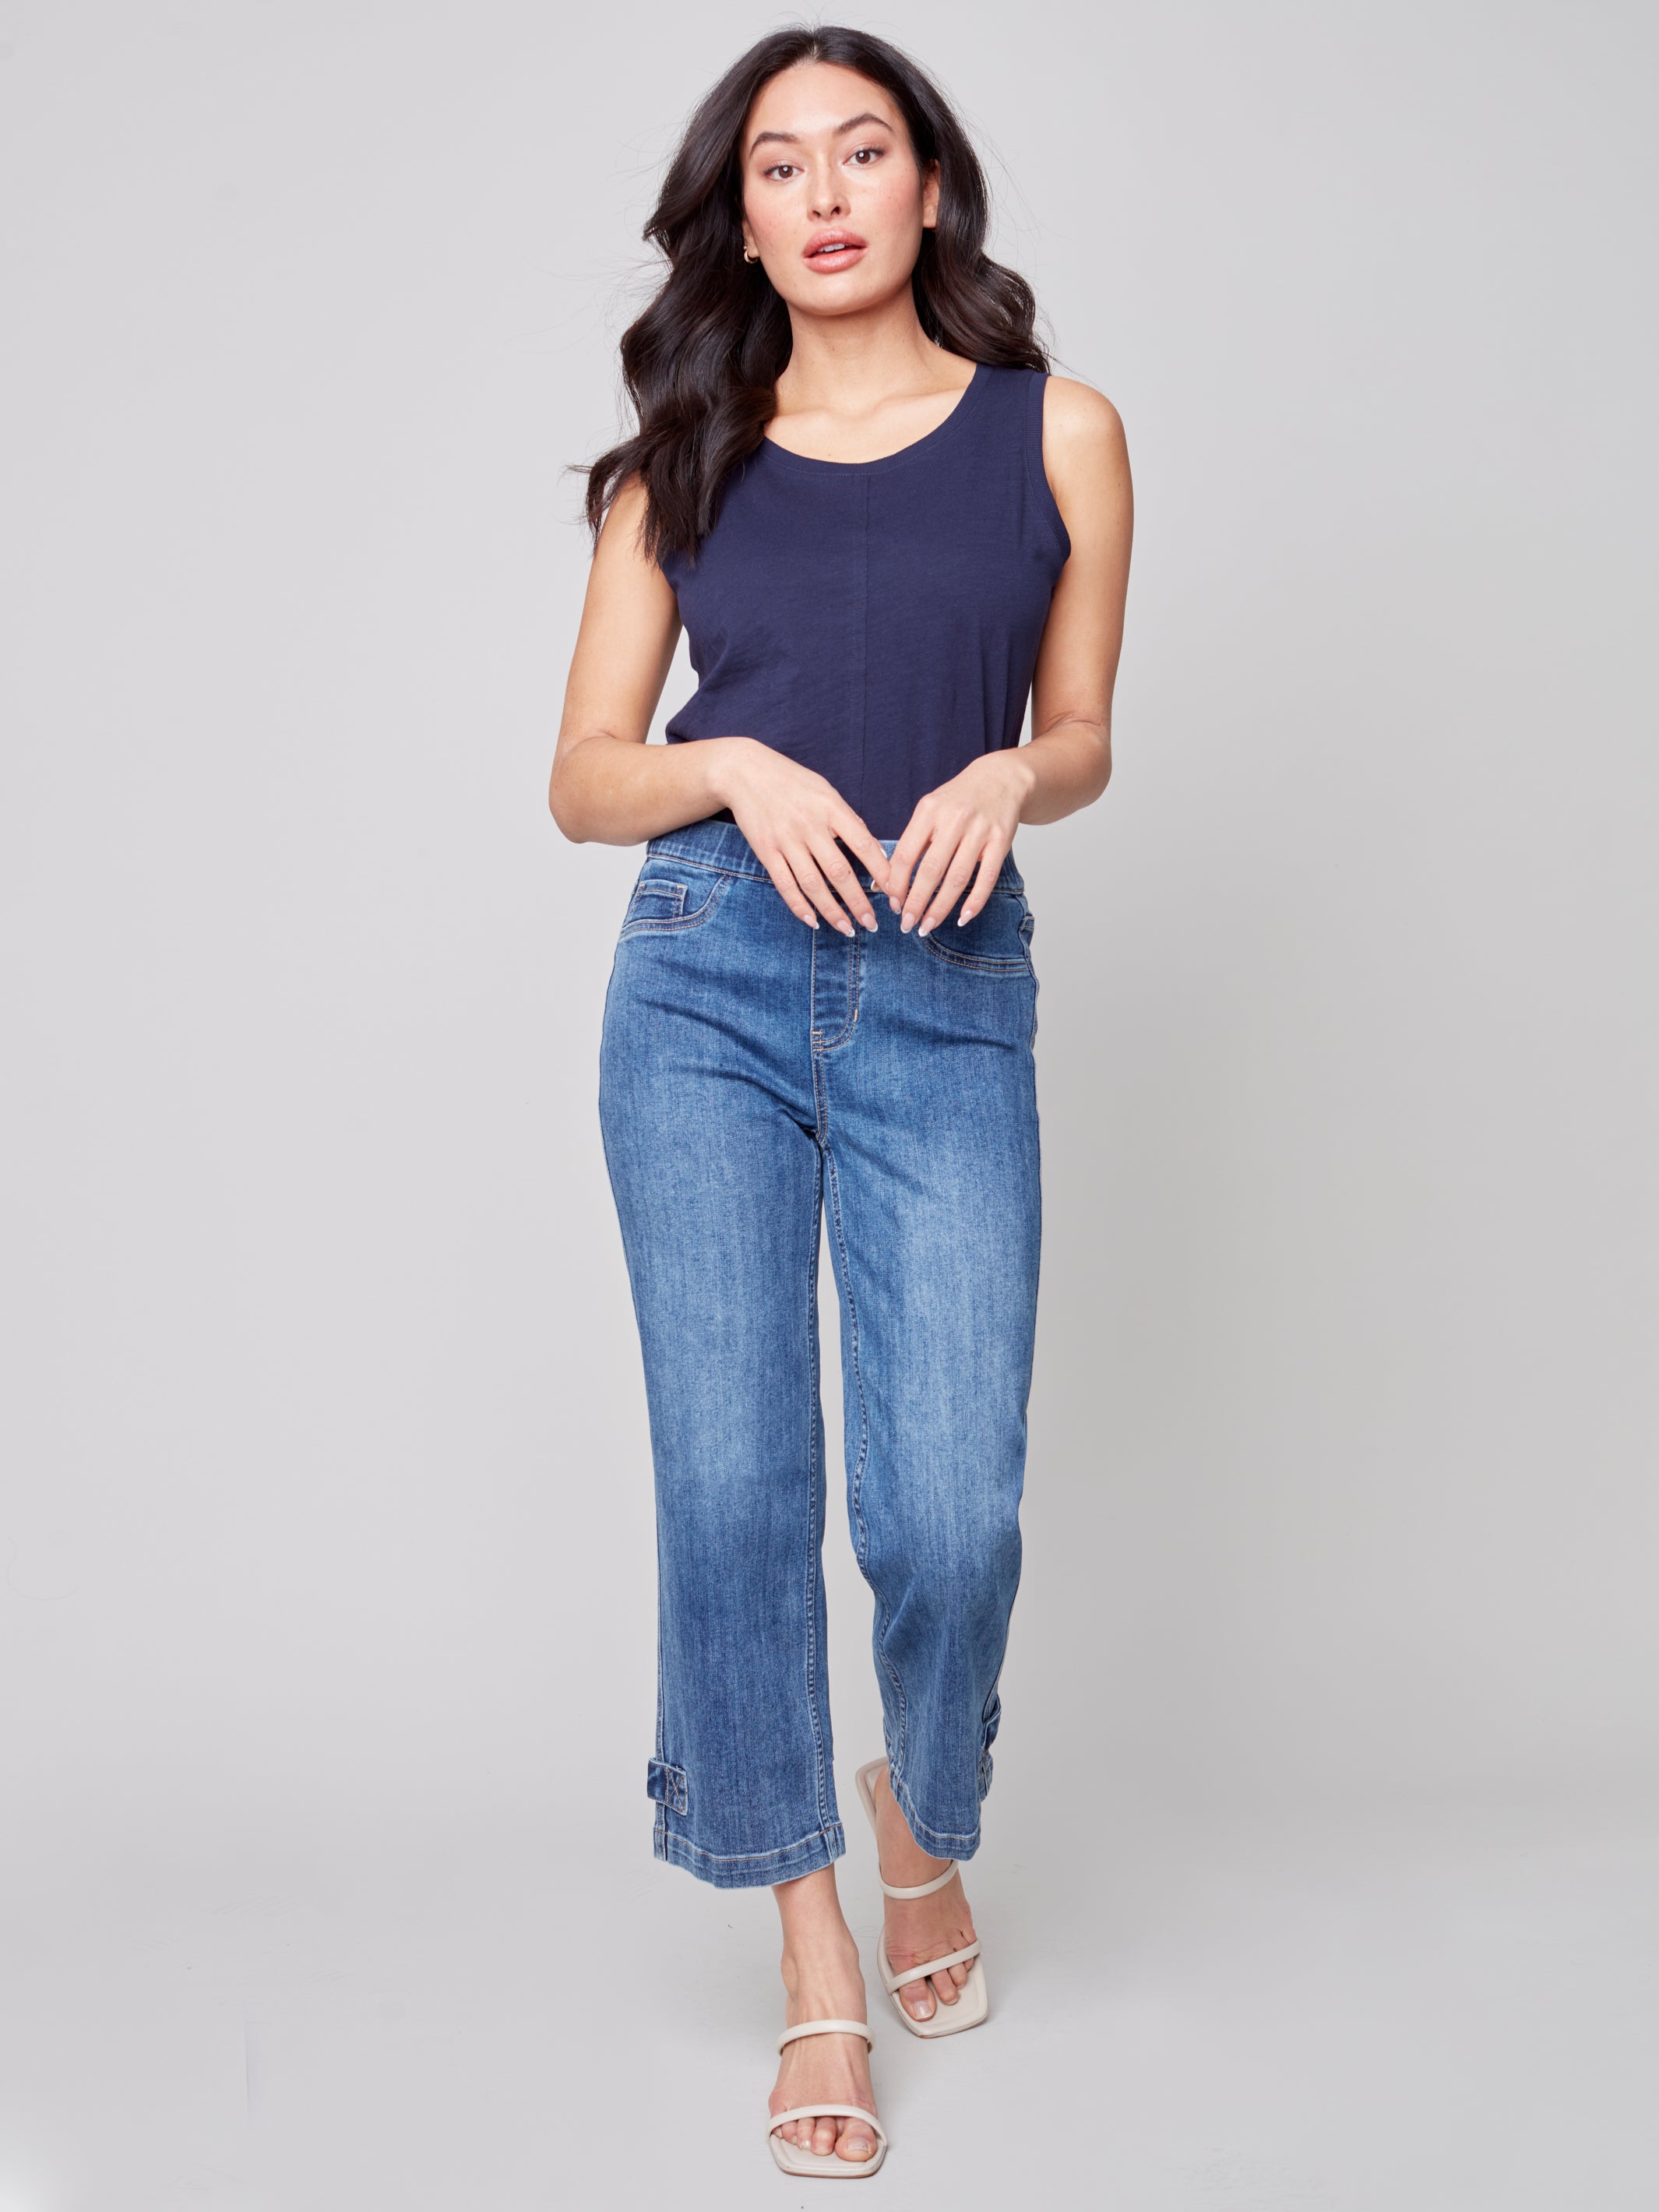 Pull On Denim Ankle Pant with Hem Button Detail by Charlie B